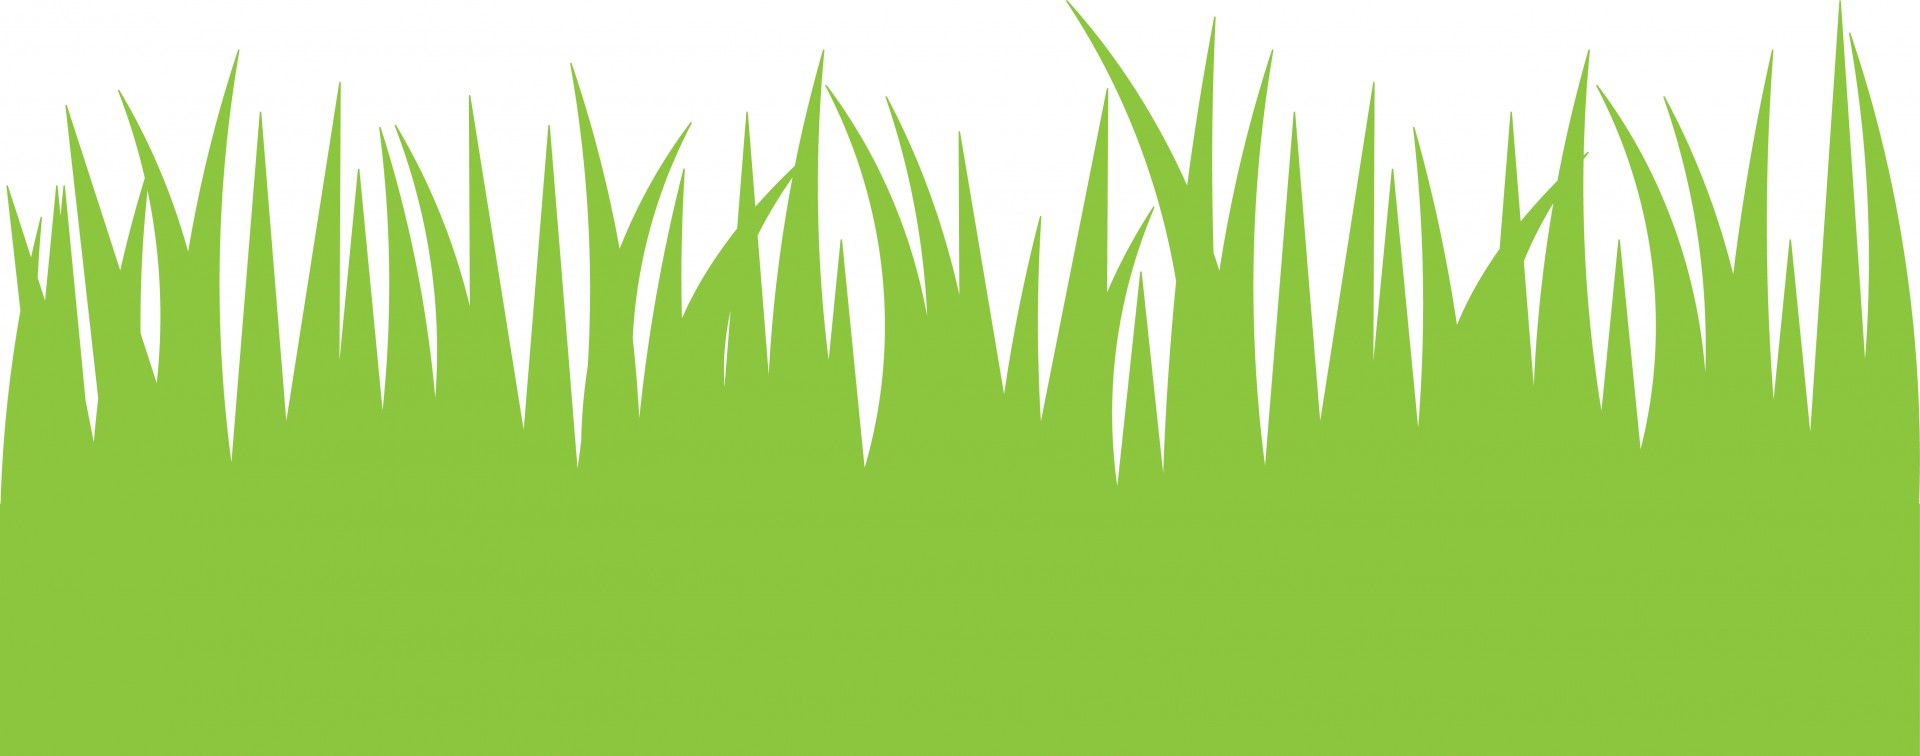 free grass pictures clip art - photo #30